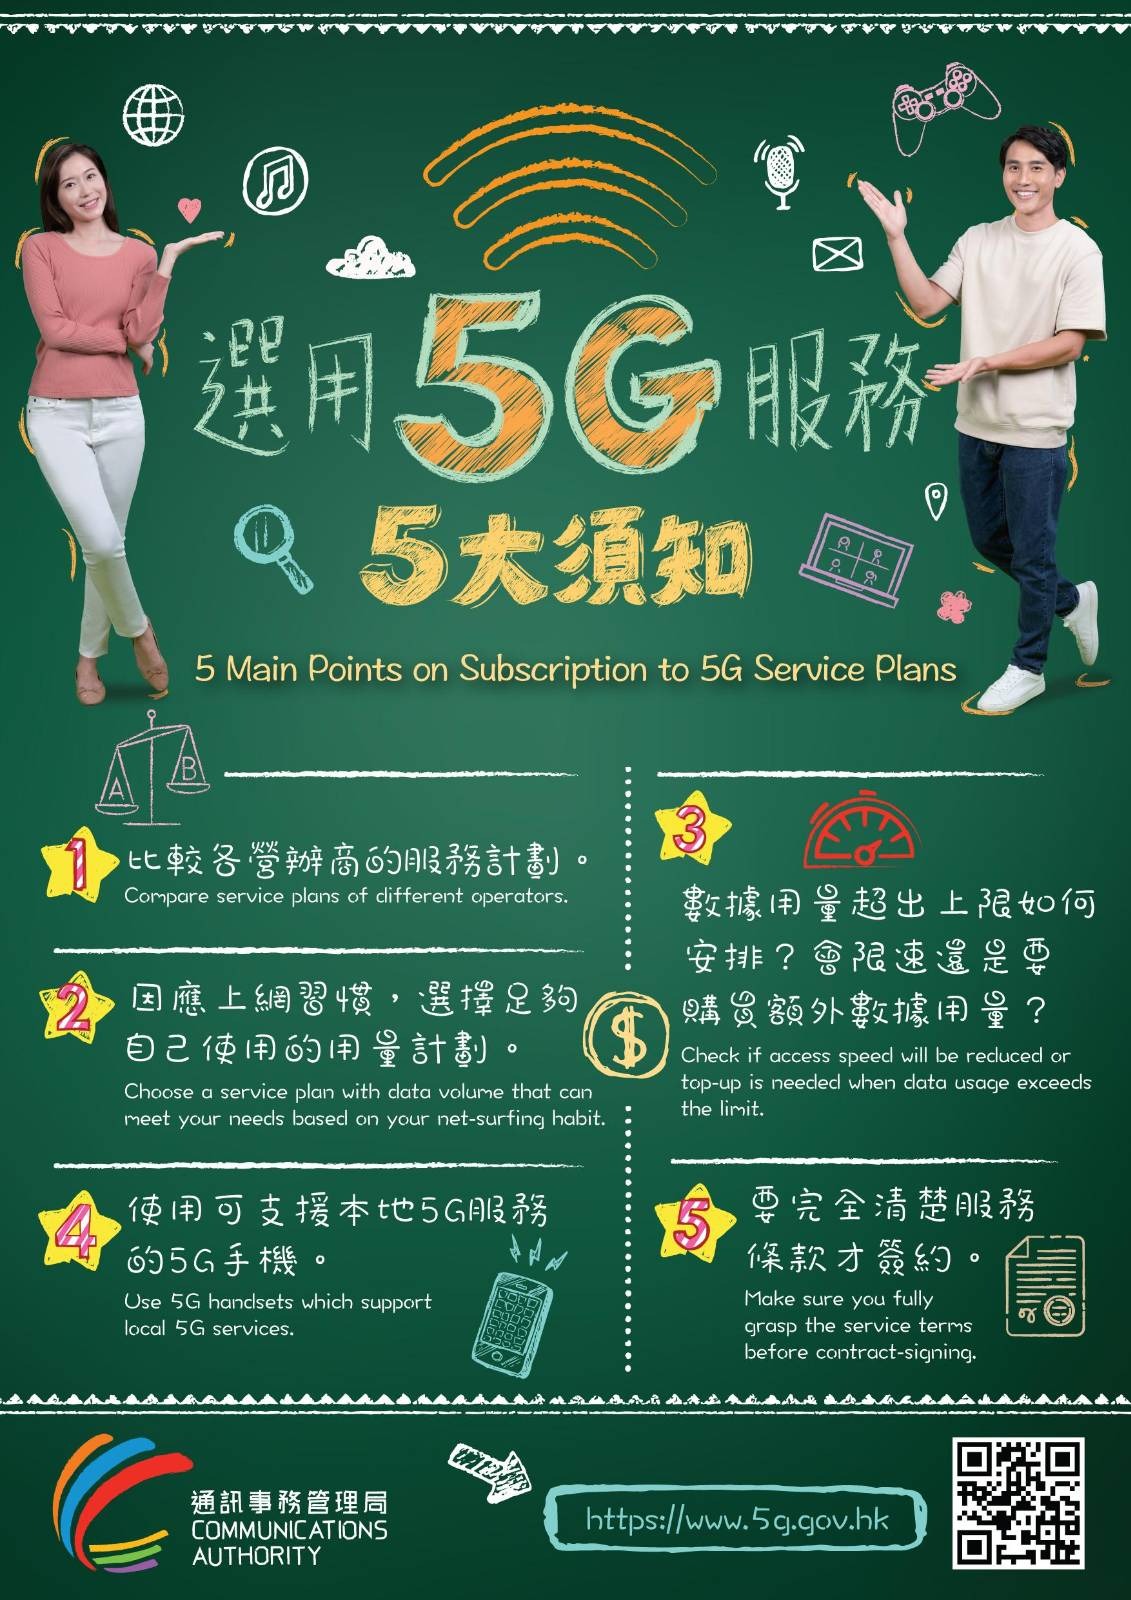 5 Main Points on Subscription to 5G Service Plans